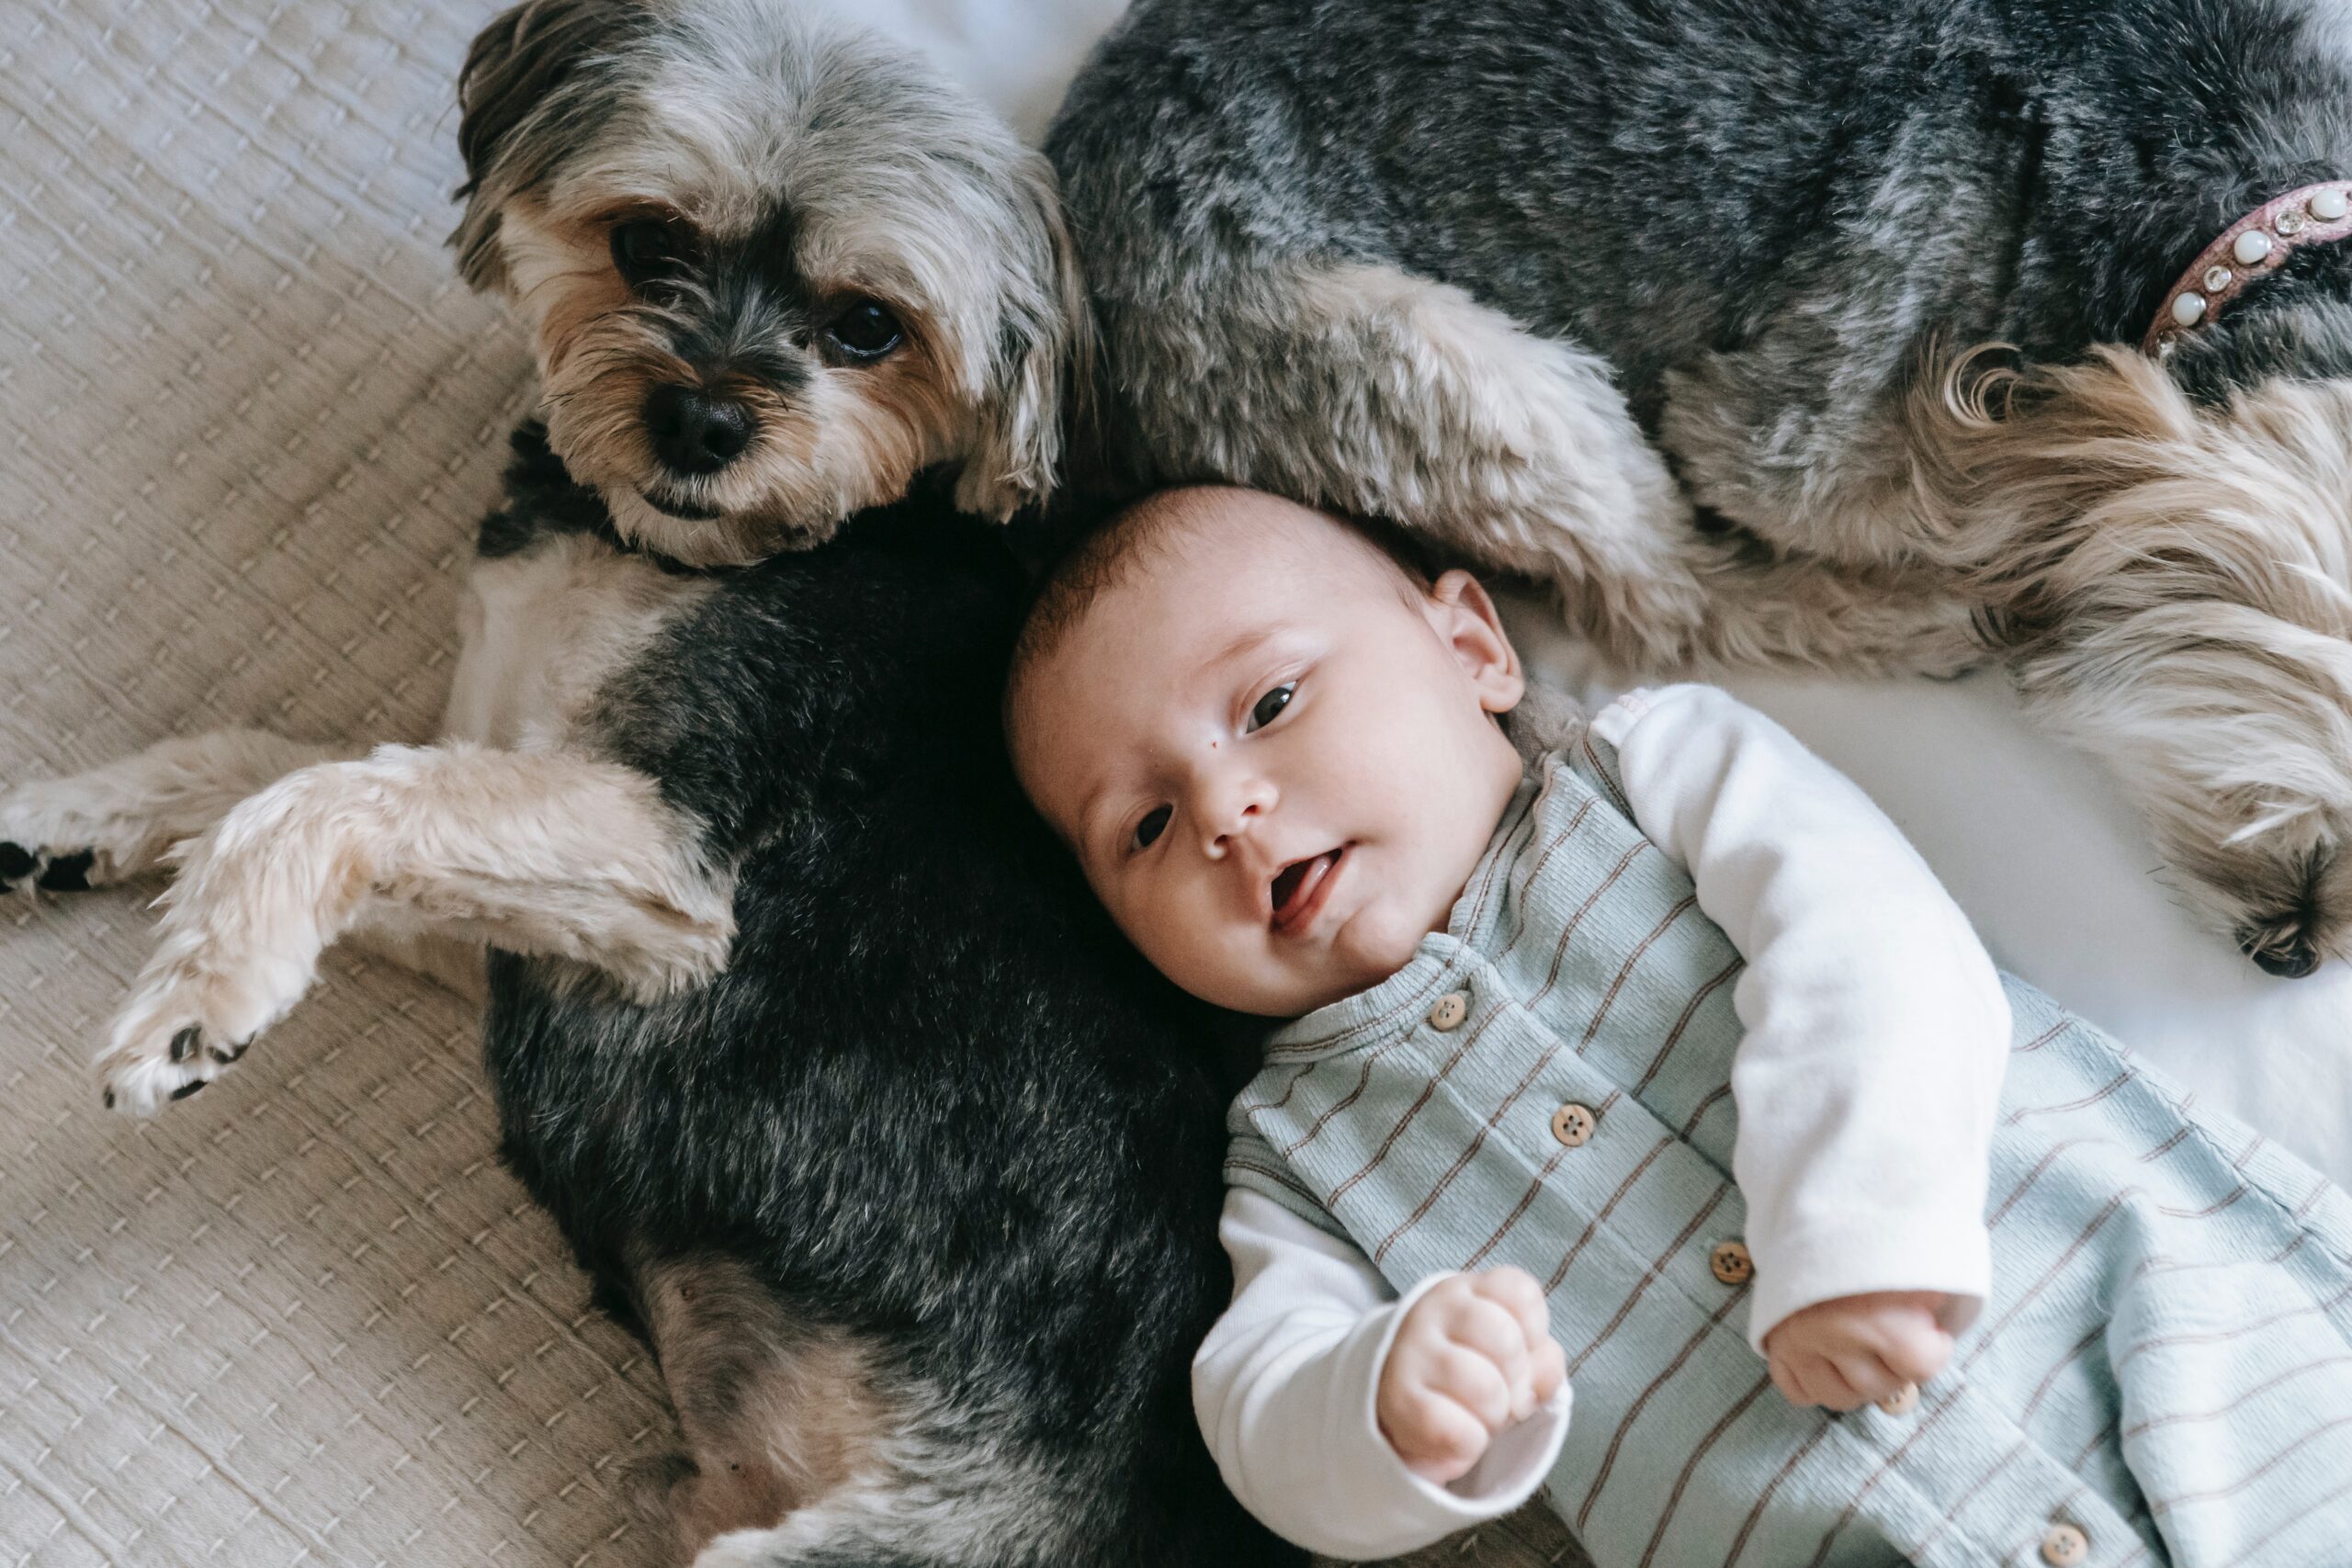 Effect of dog to baby's immune system